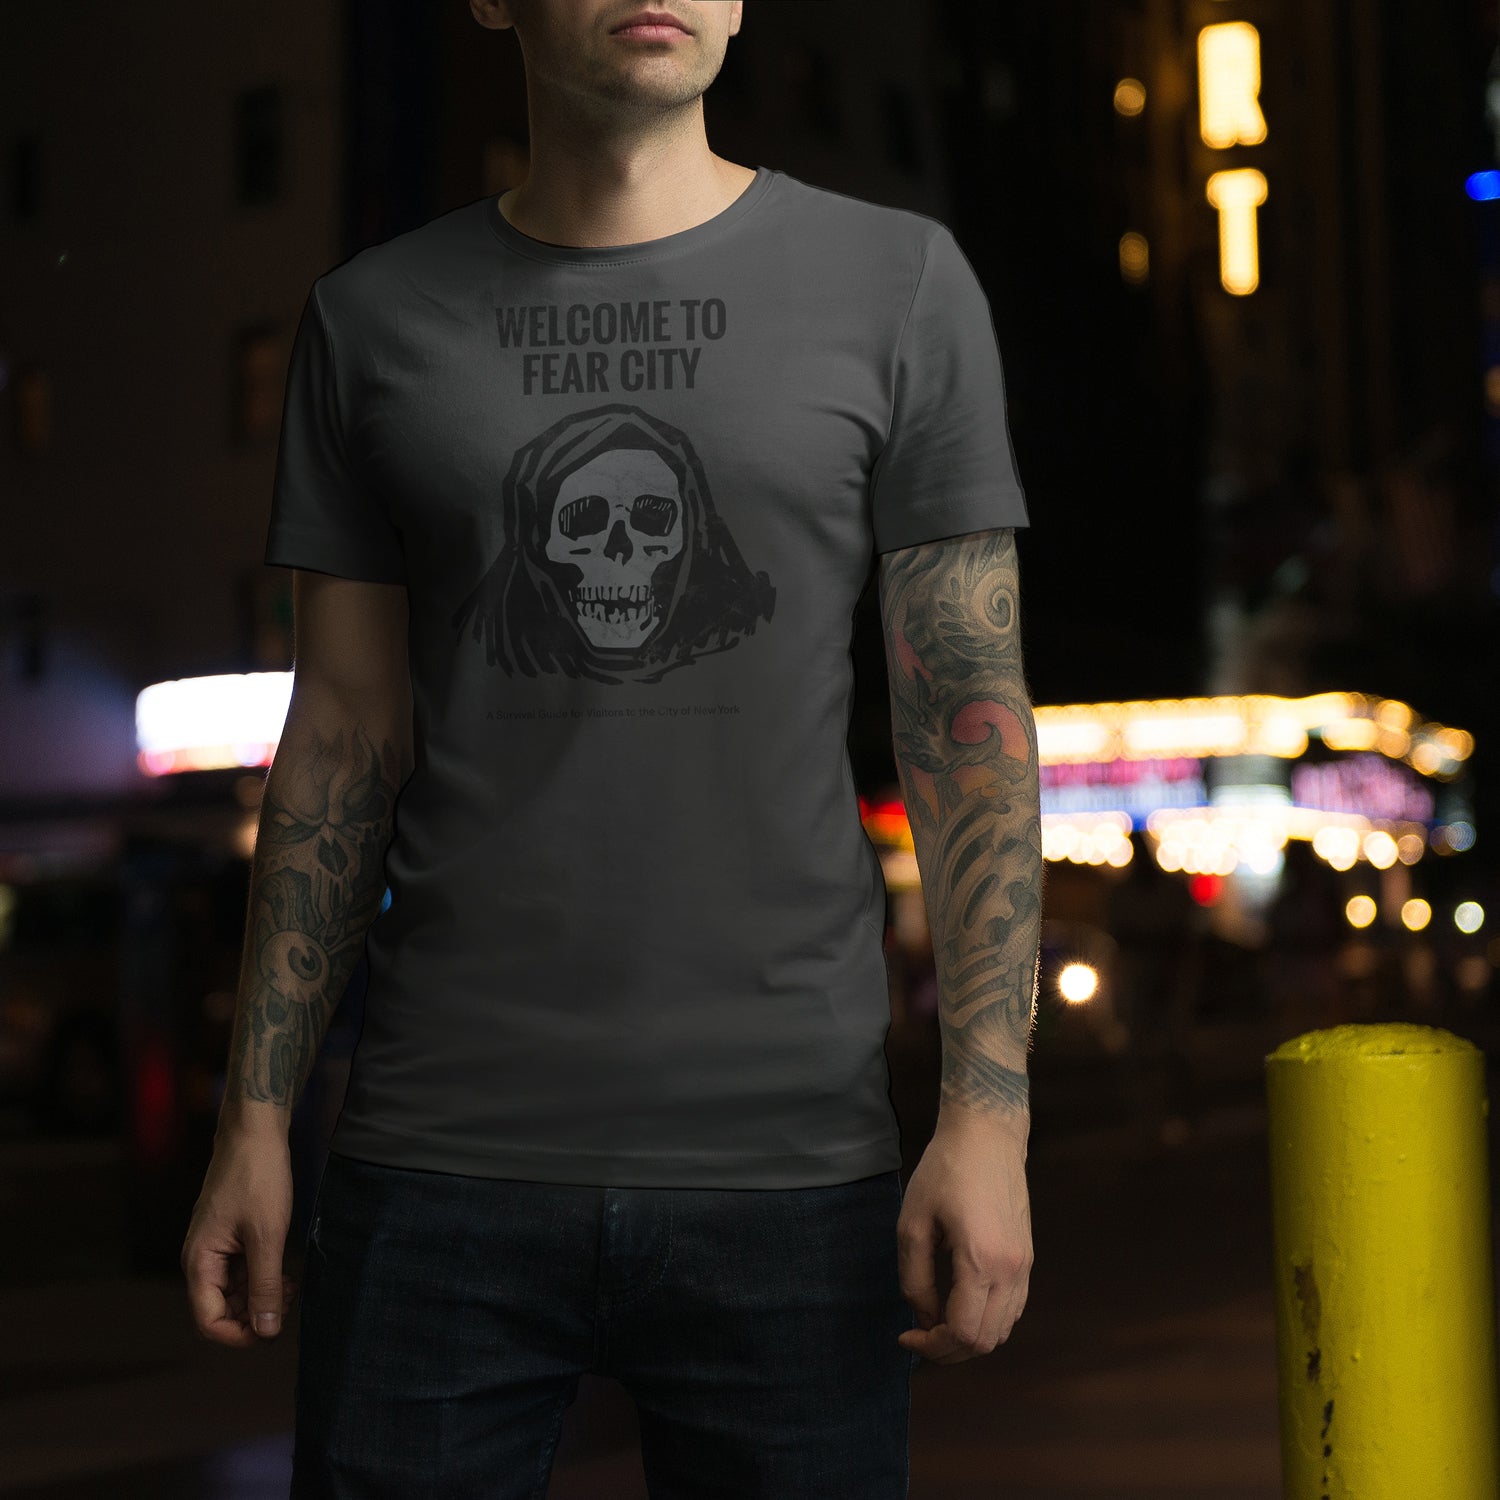 Welcome to Fear City T-Shirt